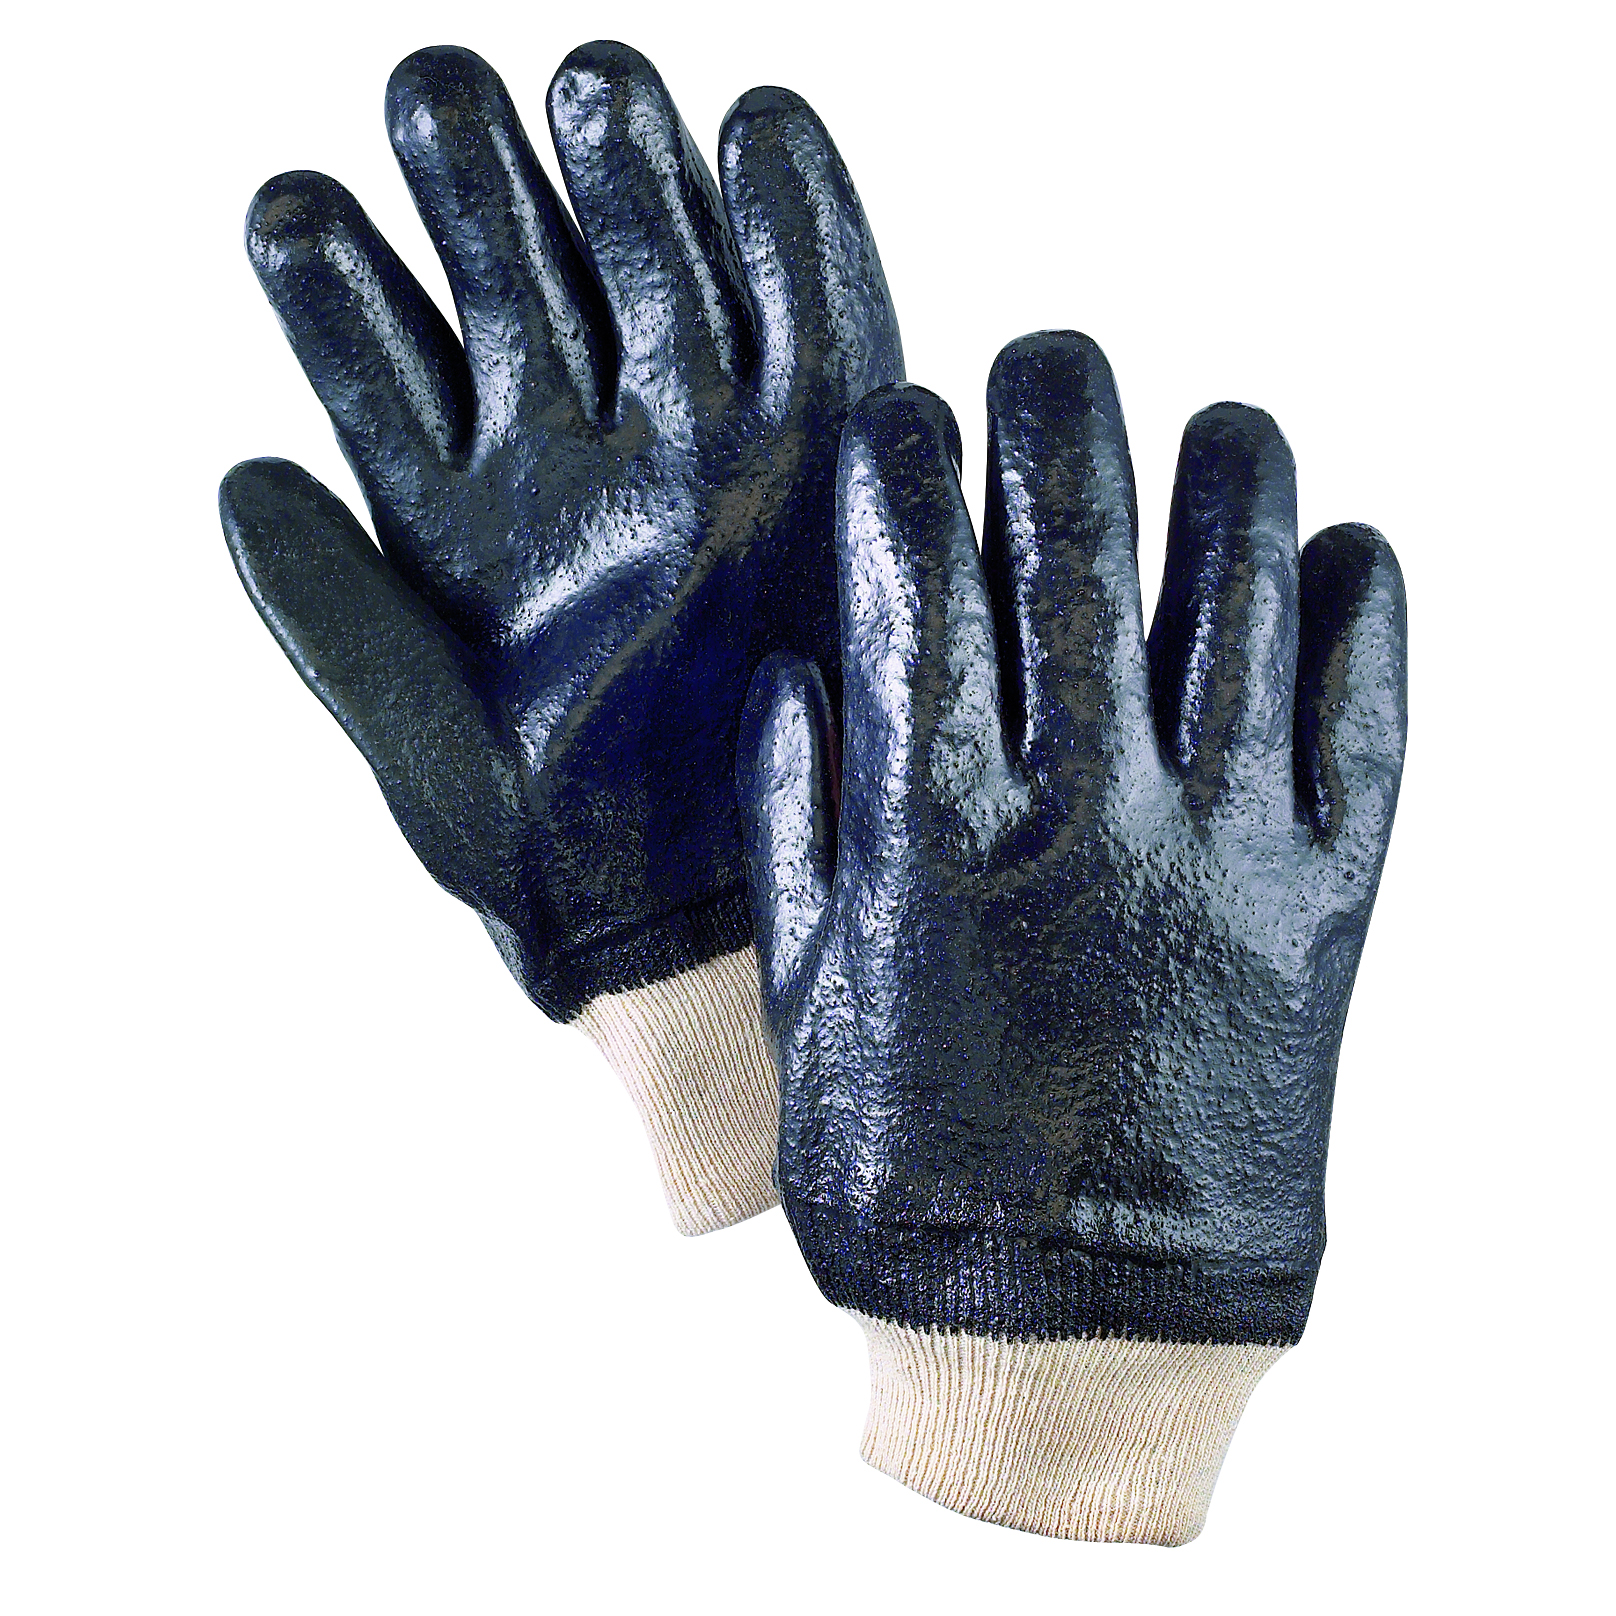 PVC Gloves with Rough Finish, Knit Wrist, 1 Pair